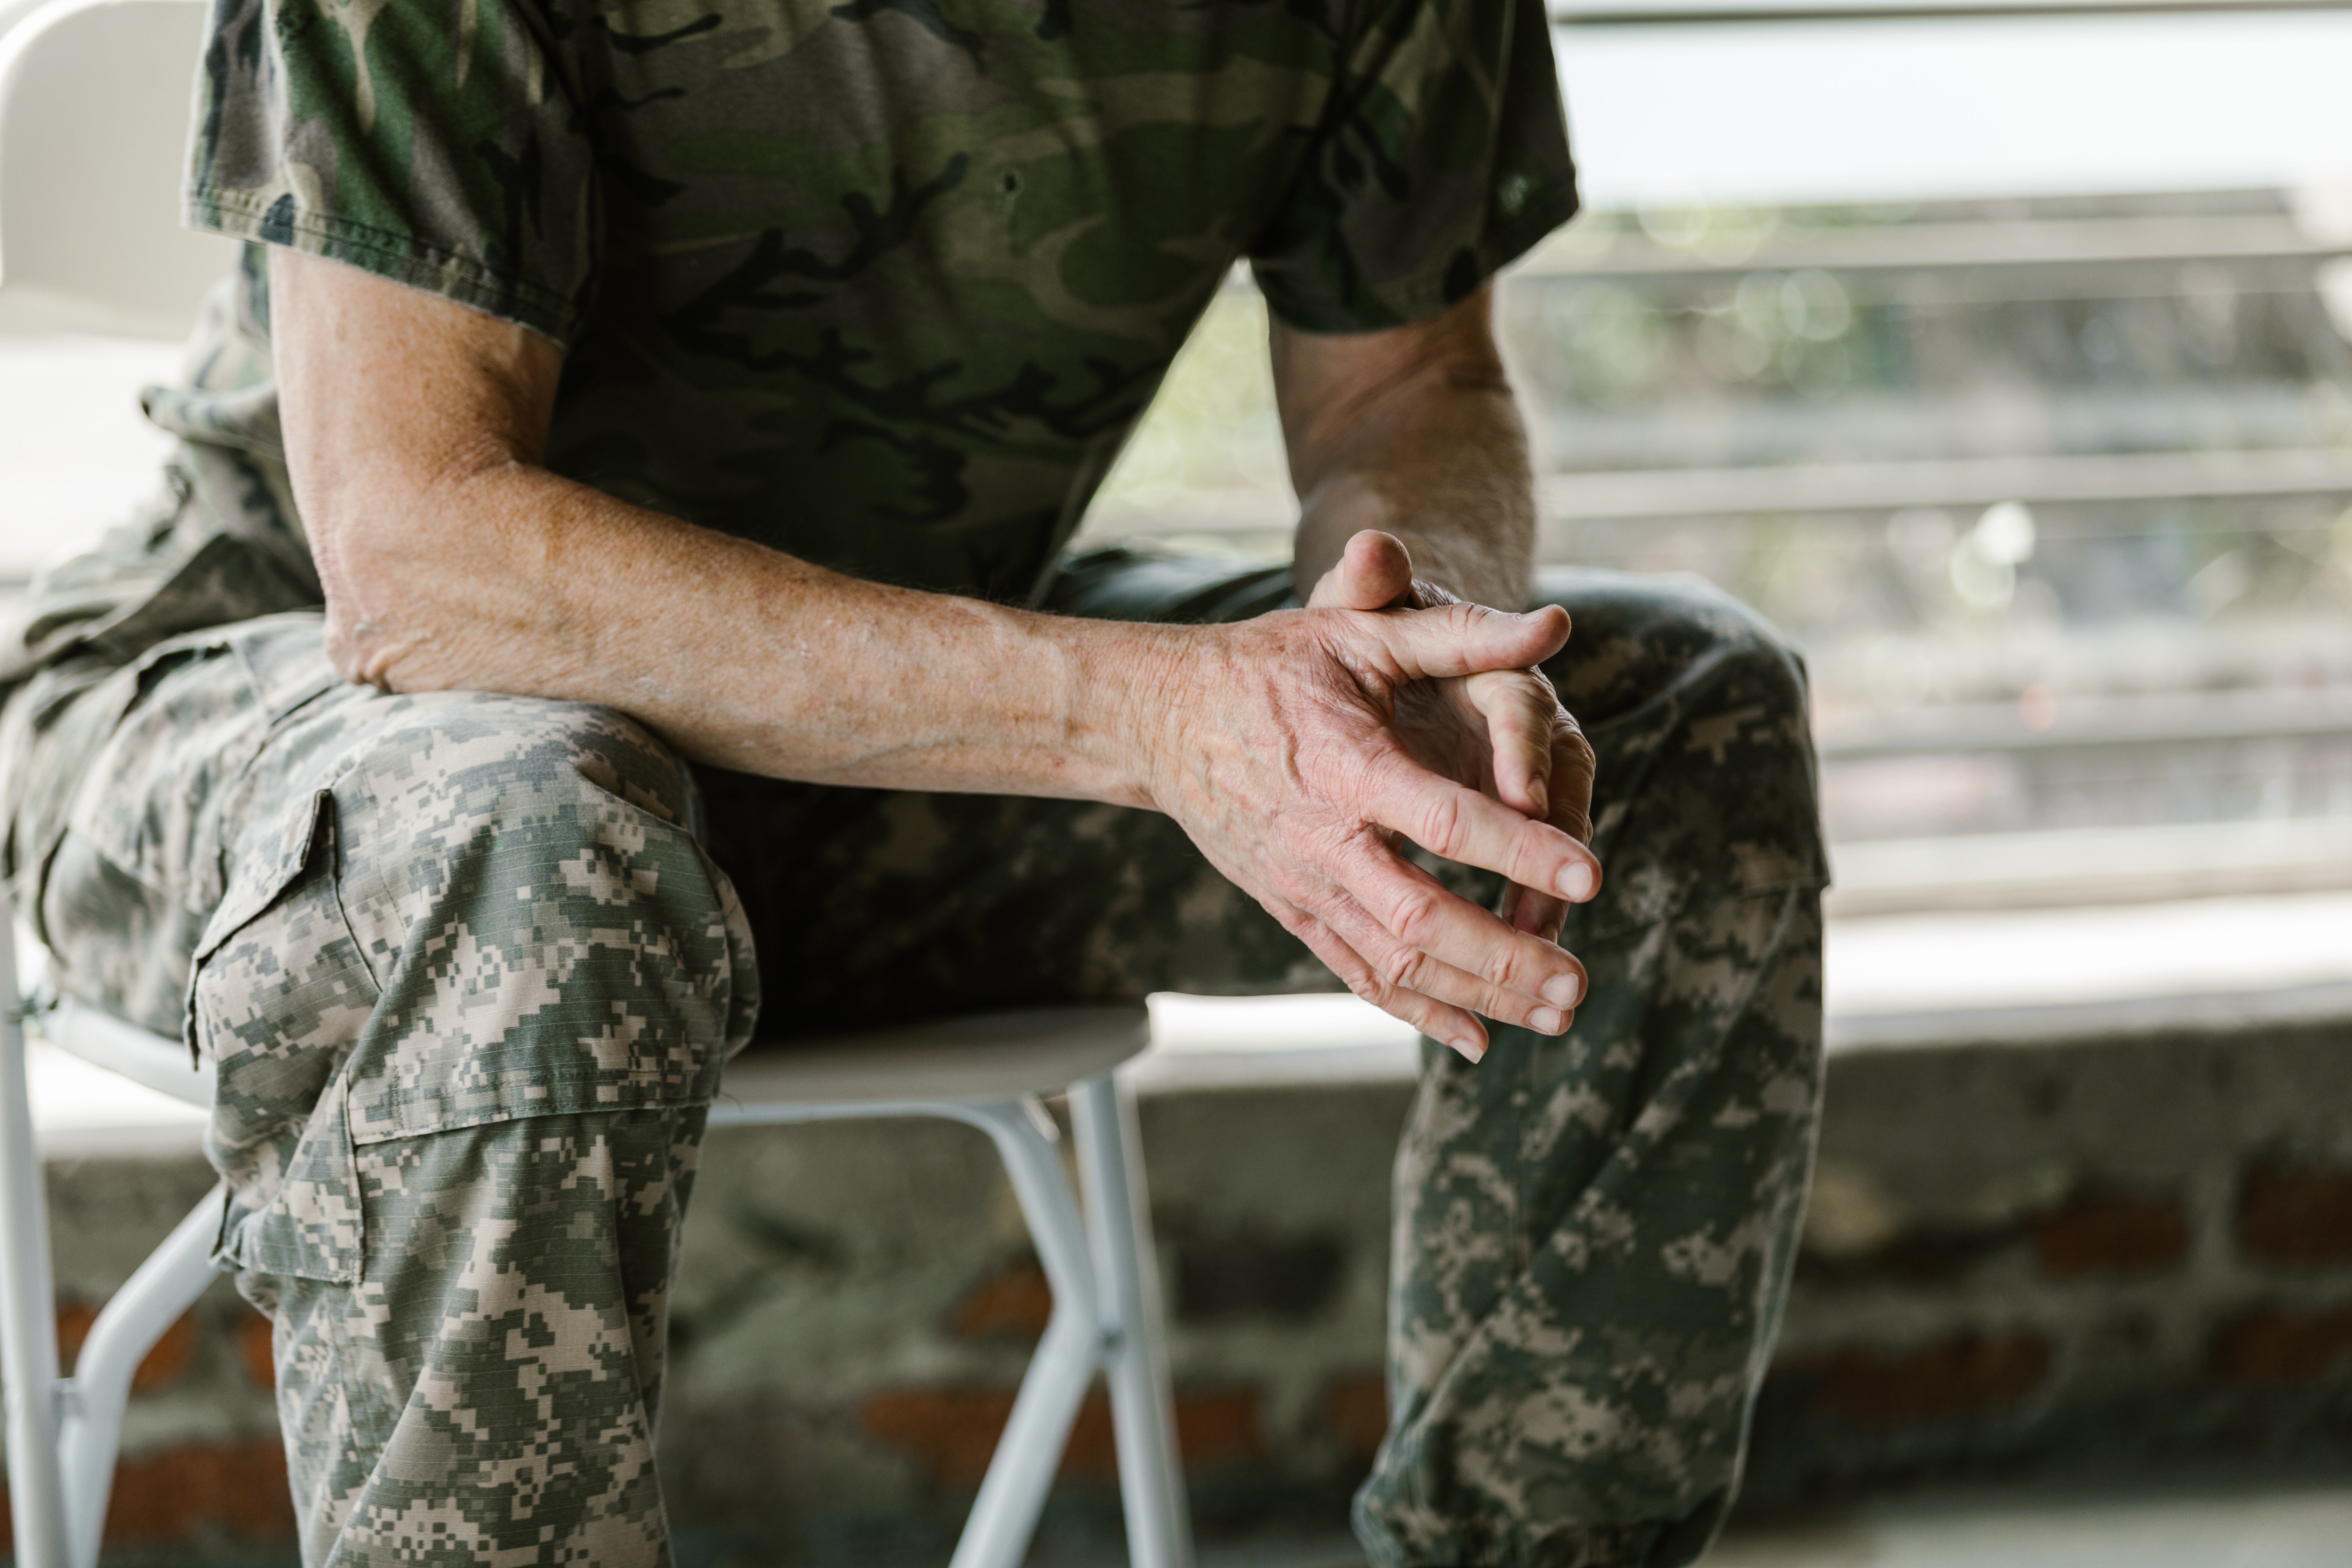 A veteran shared his perspective & advised OP on his plight. | Source: Pexels